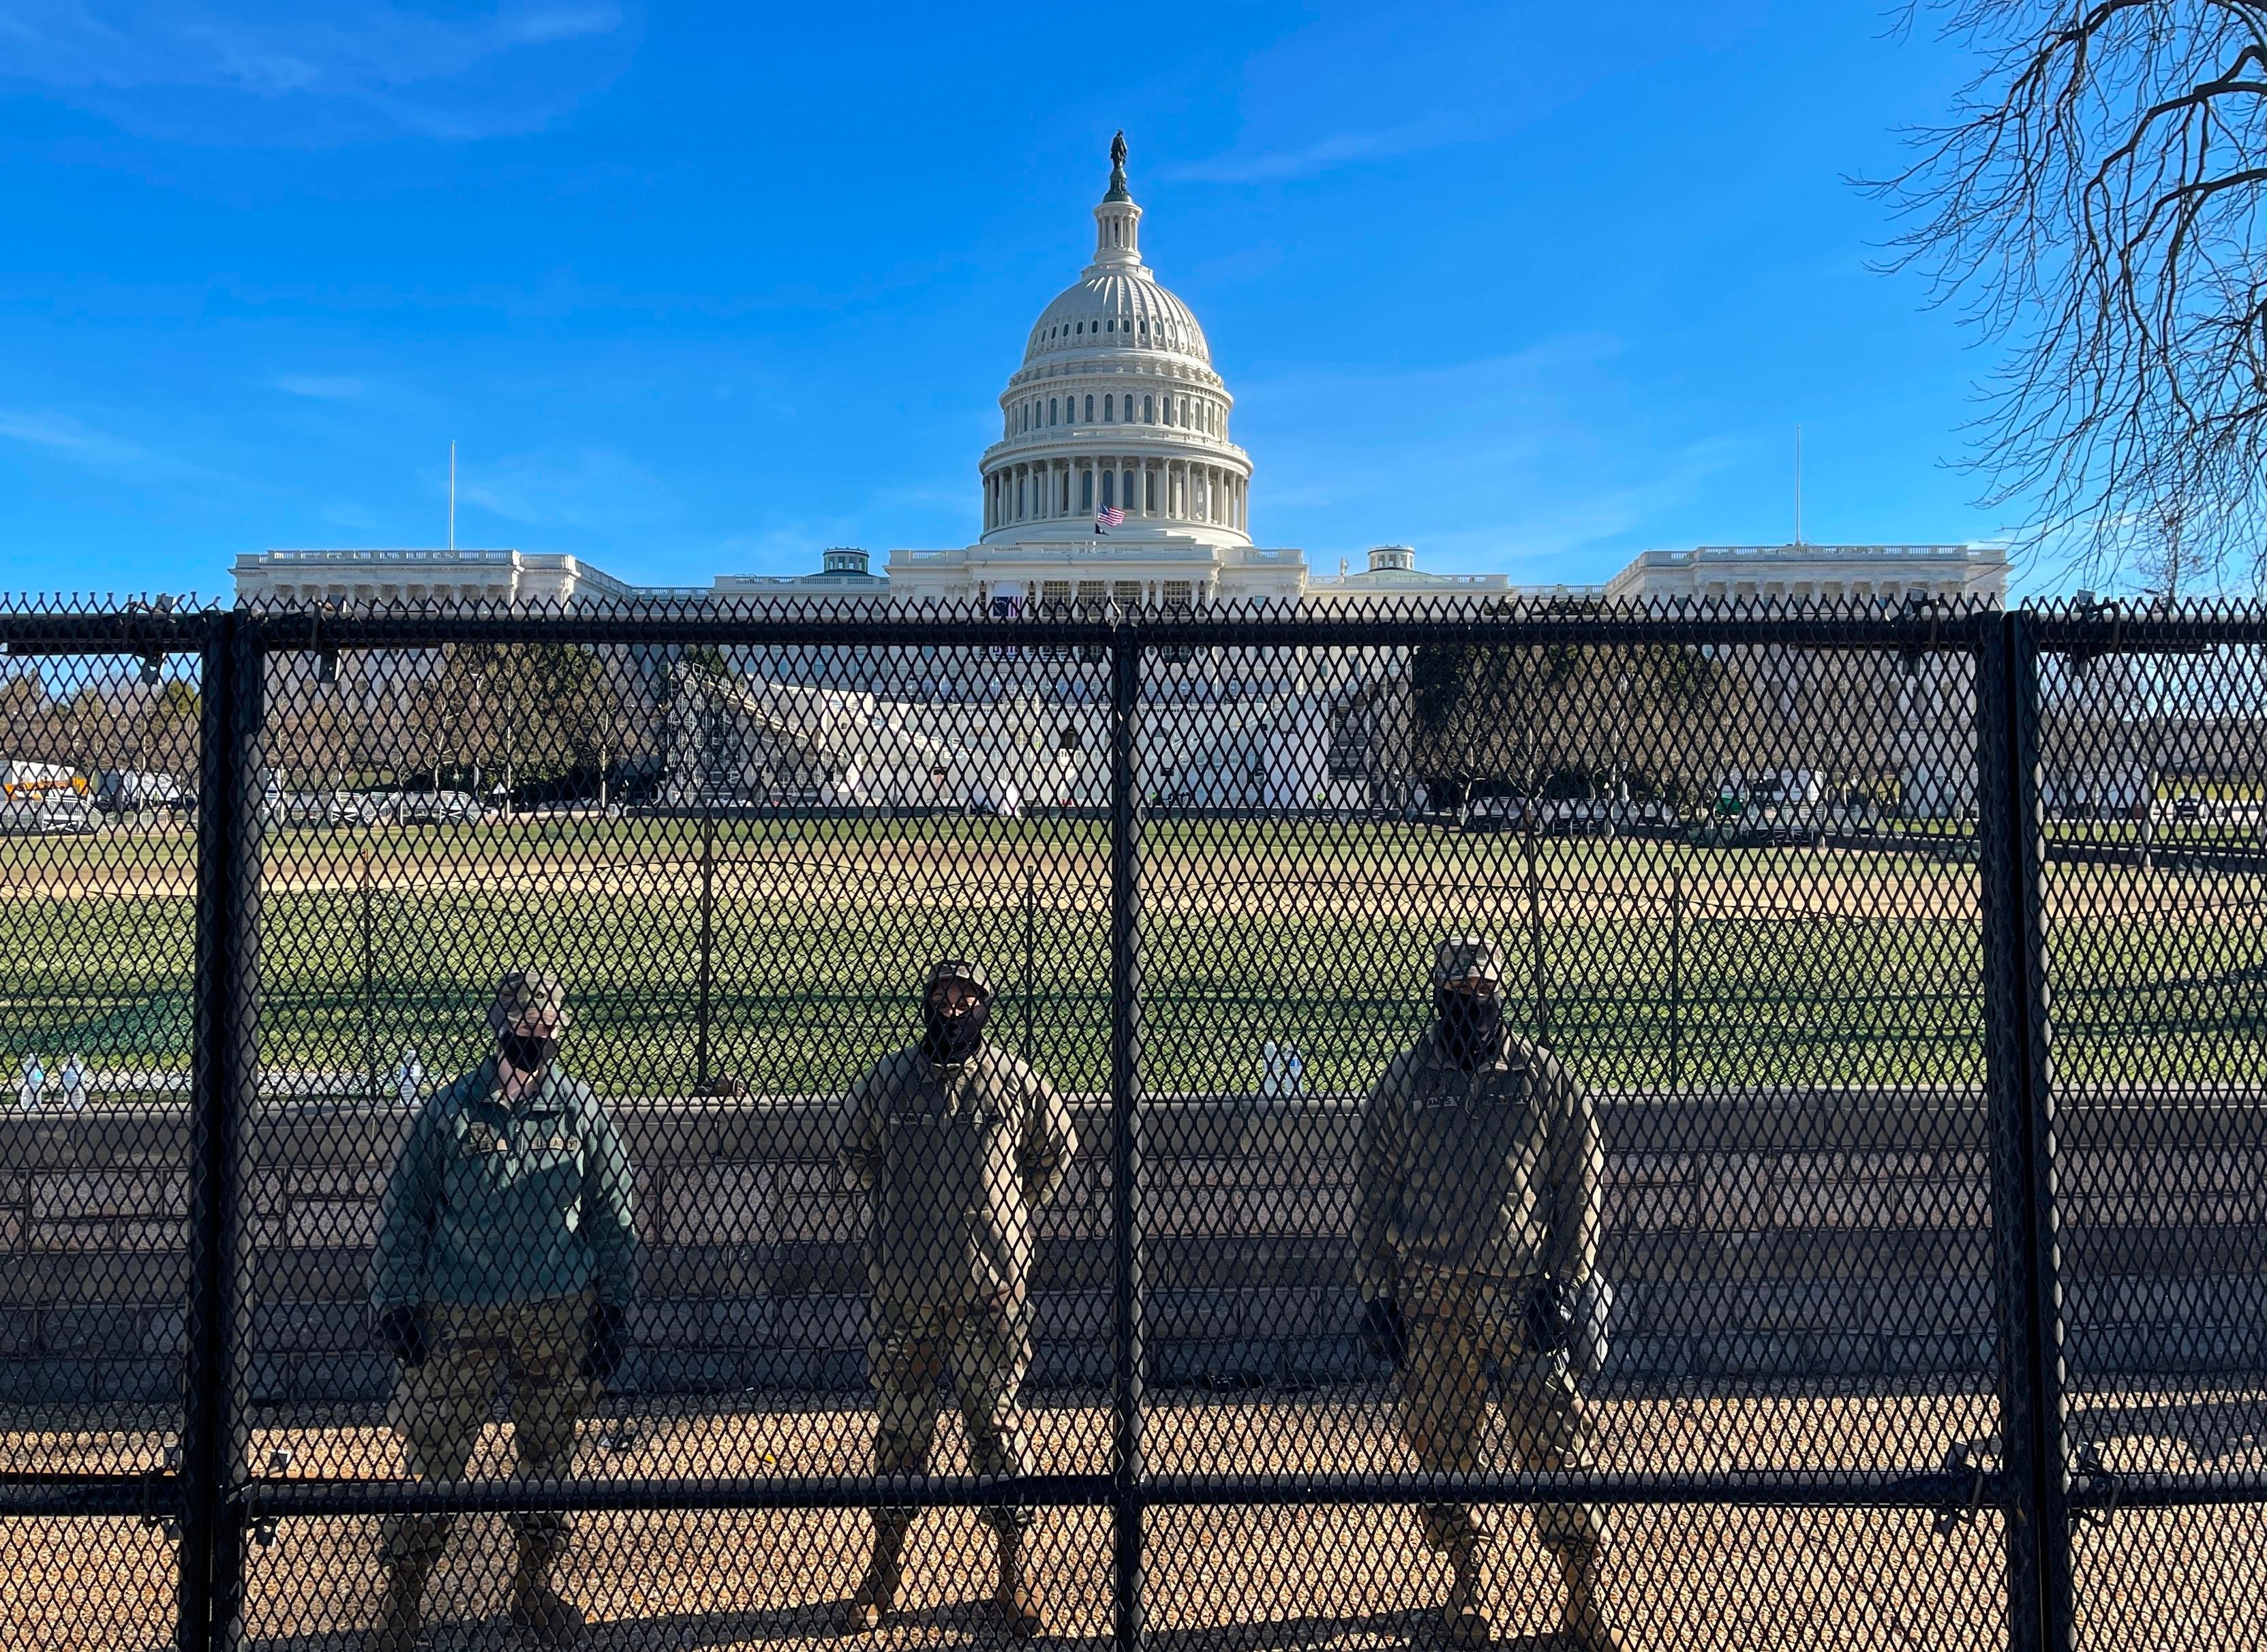 National Guard soldiers guard the grounds of the US Capitol from behind a security fence in Washington, DC